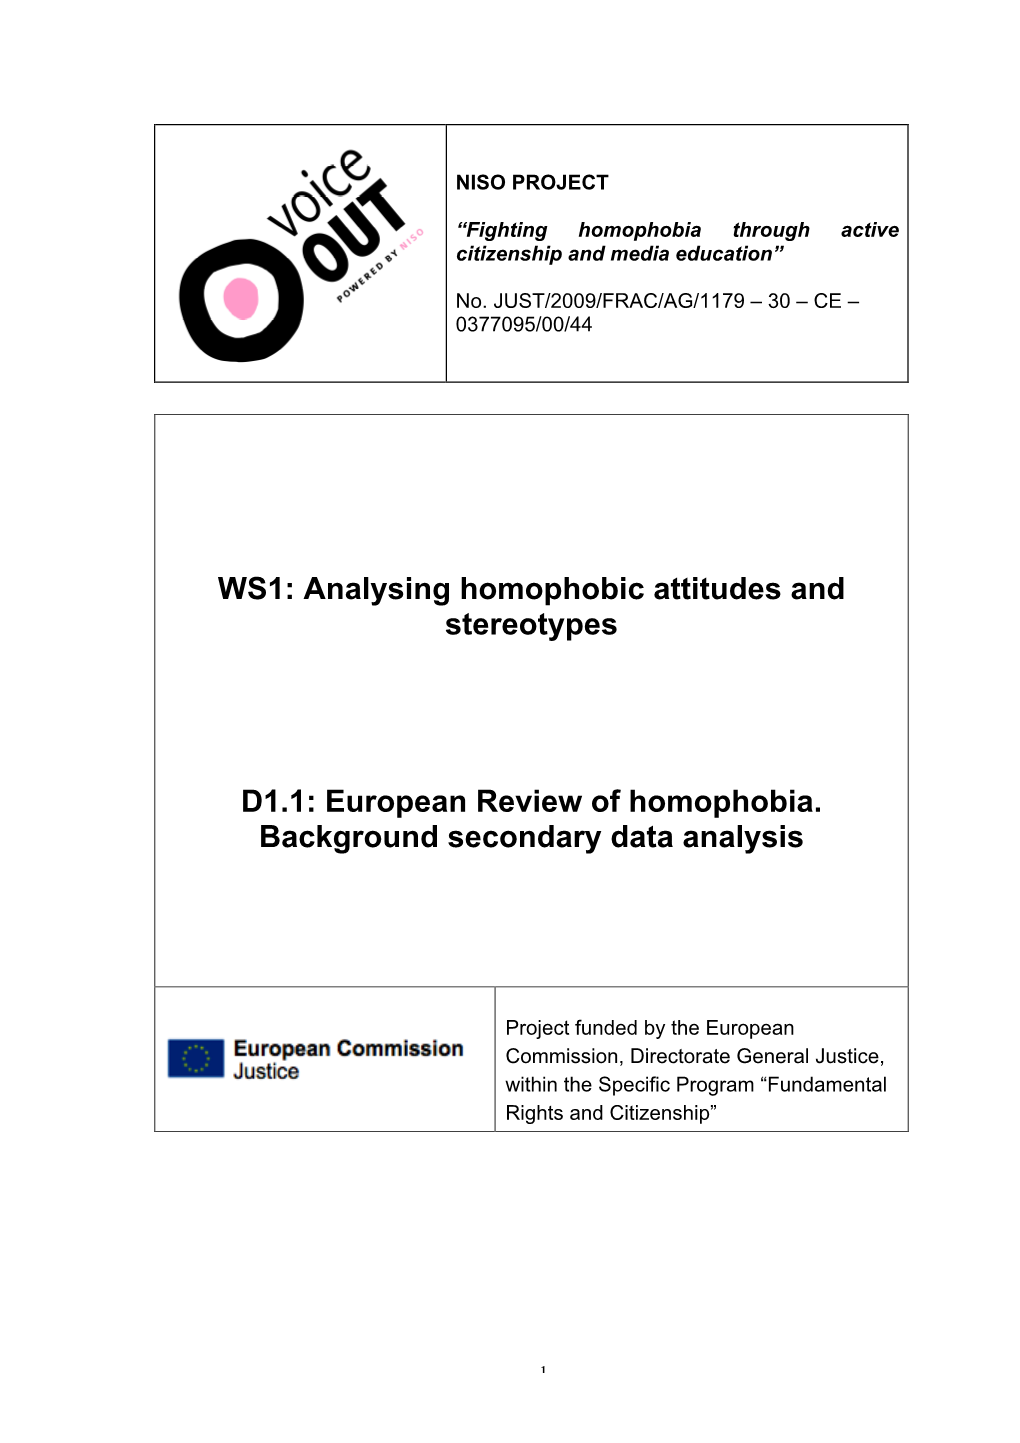 WS1: Analysing Homophobic Attitudes and Stereotypes D1.1: European Review of Homophobia. Background Secondary Data Analysis